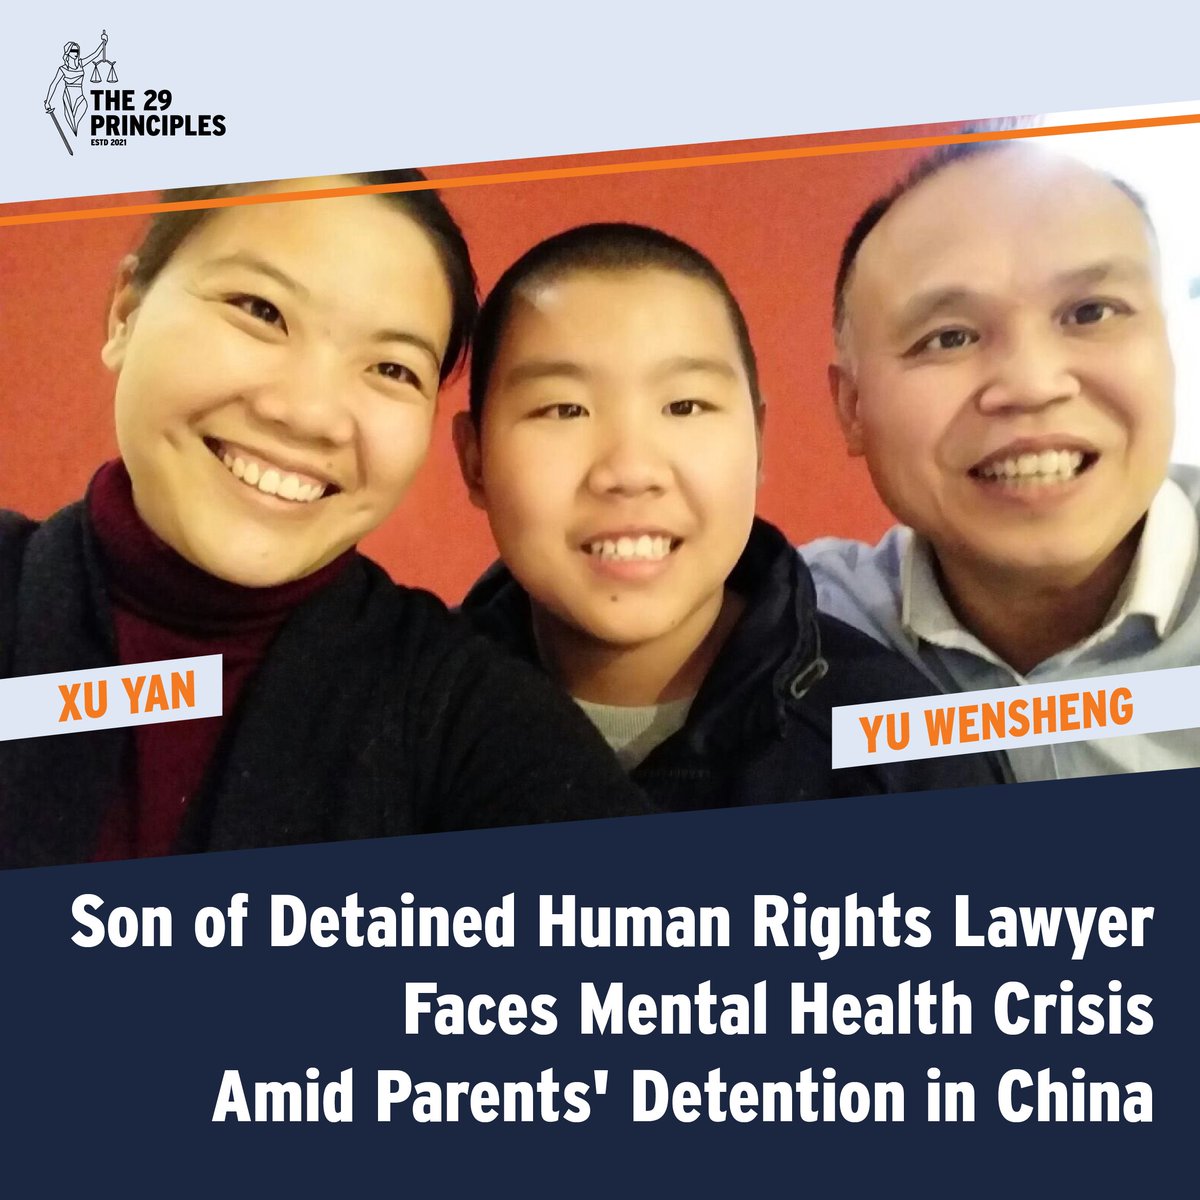 It's been nearly a year since human rights lawyer #YuWensheng and his wife #XuYan were arrested by Chinese authorities. Their 19-year-old son, Yu Zhenyang, has suffered greatly, dropping out of high school and attempting suicide twice due to the trauma of his parents' suppression